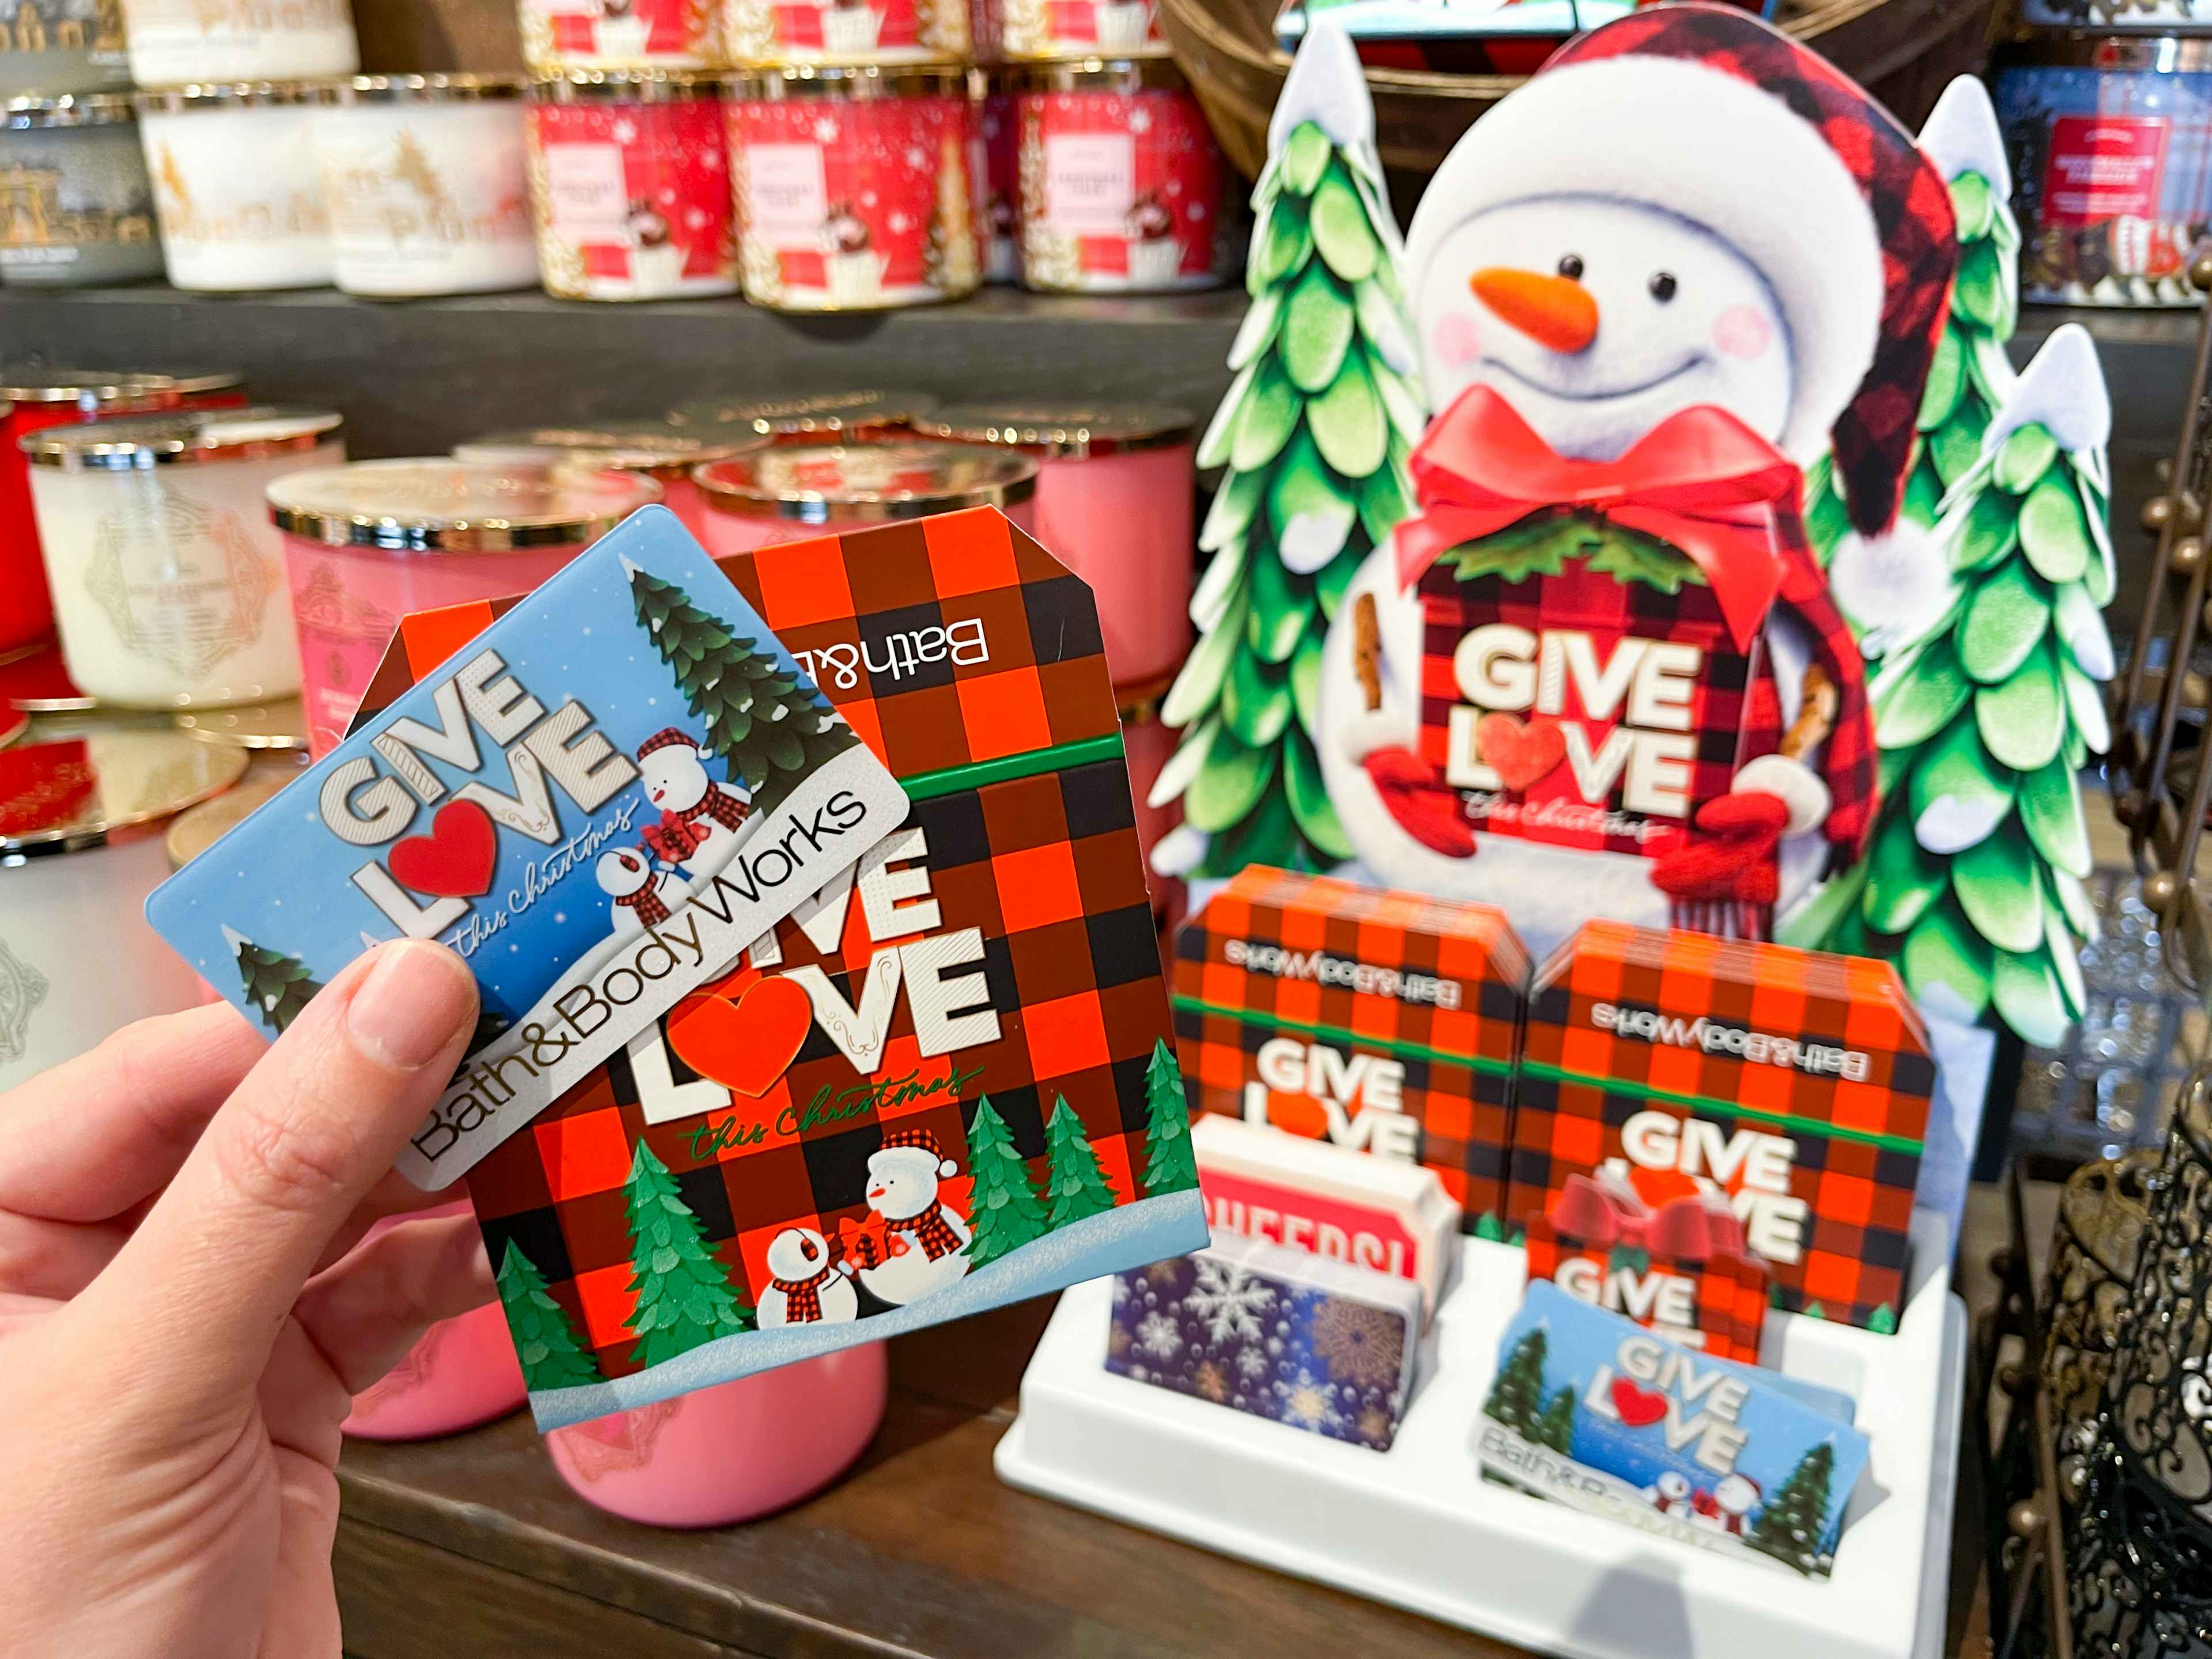 A display of gift cards and Bath and Body Works.